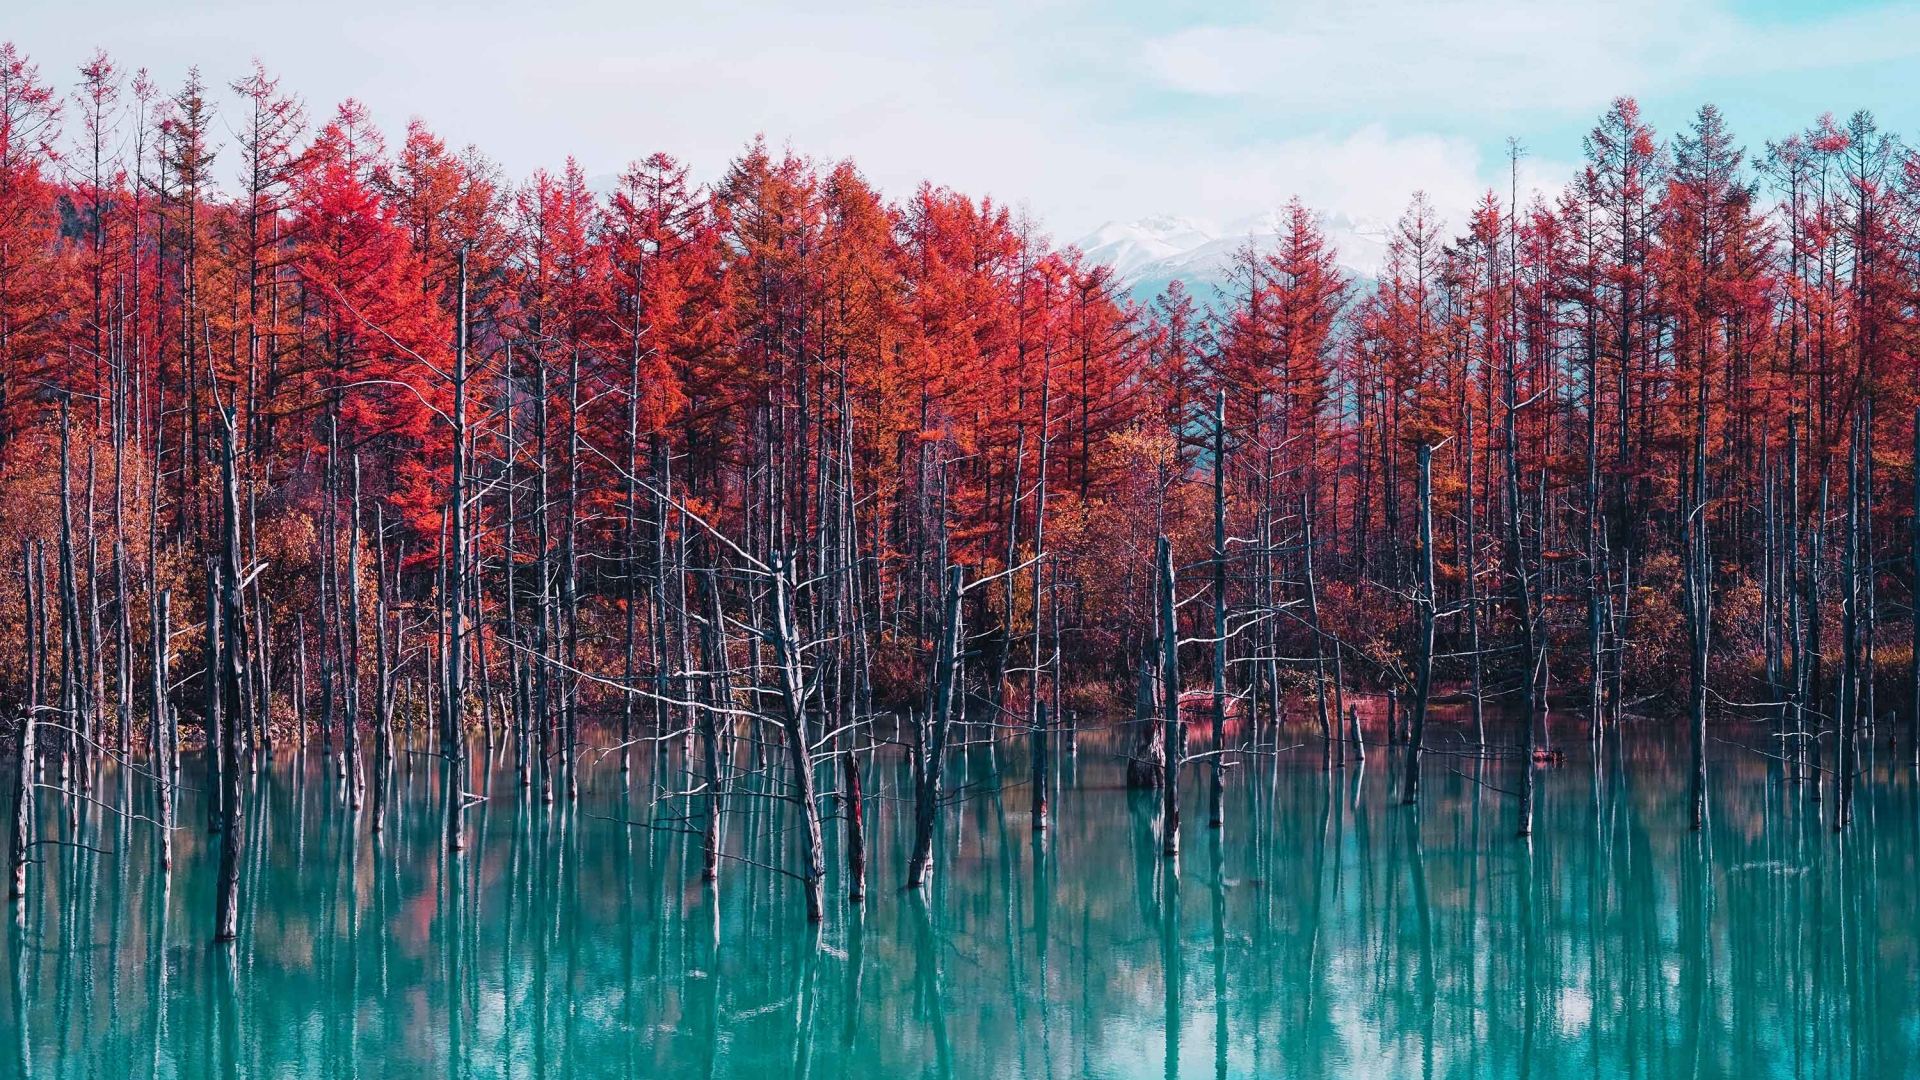 General 1920x1080 nature landscape trees forest water lake reflection